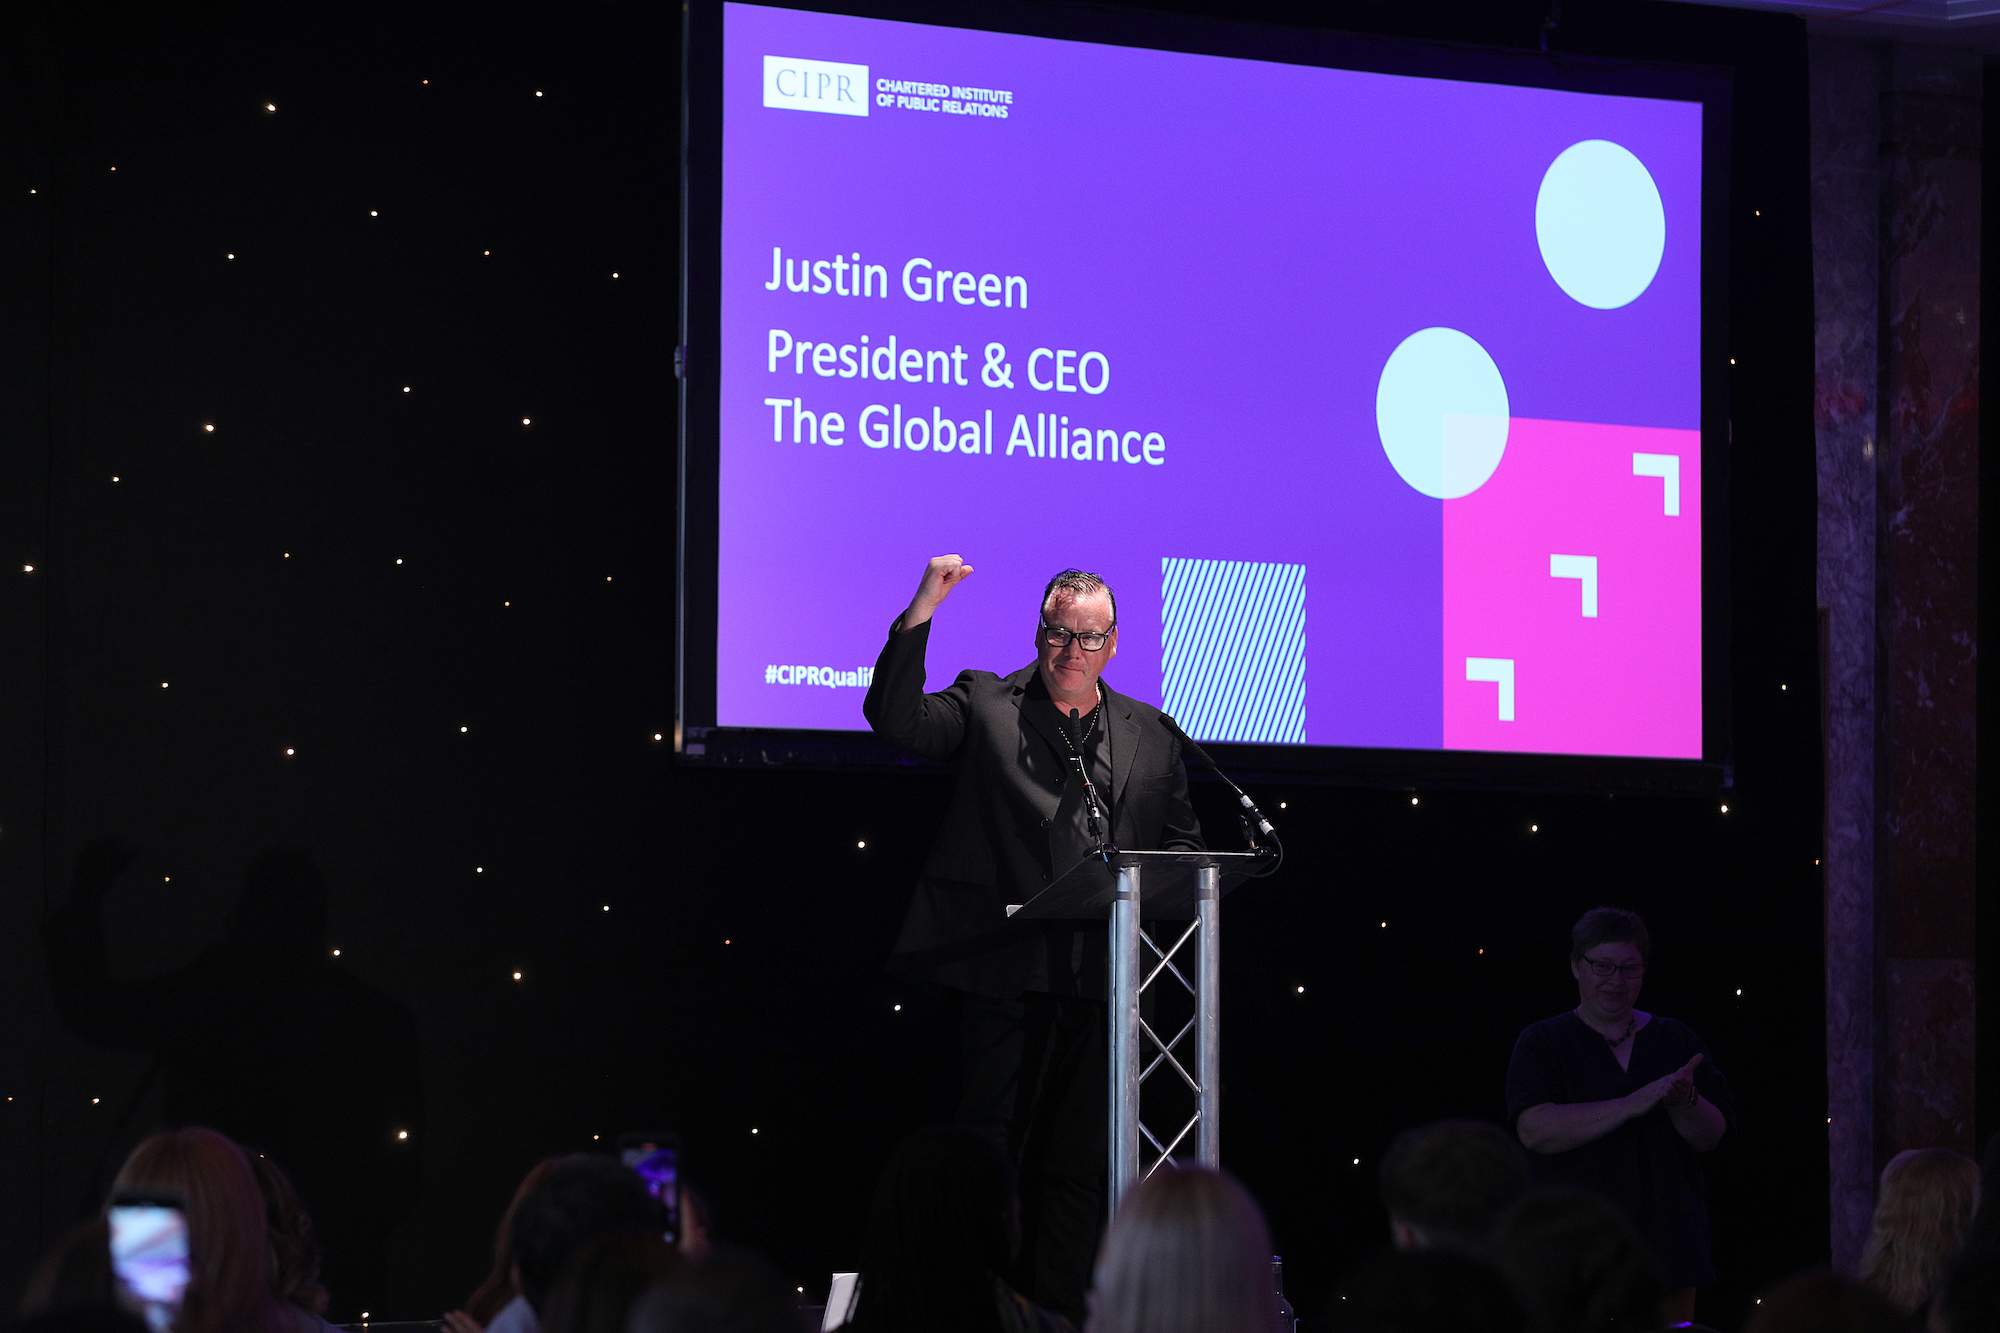 Justin Green re-appointed as President & CEO of Global Alliance